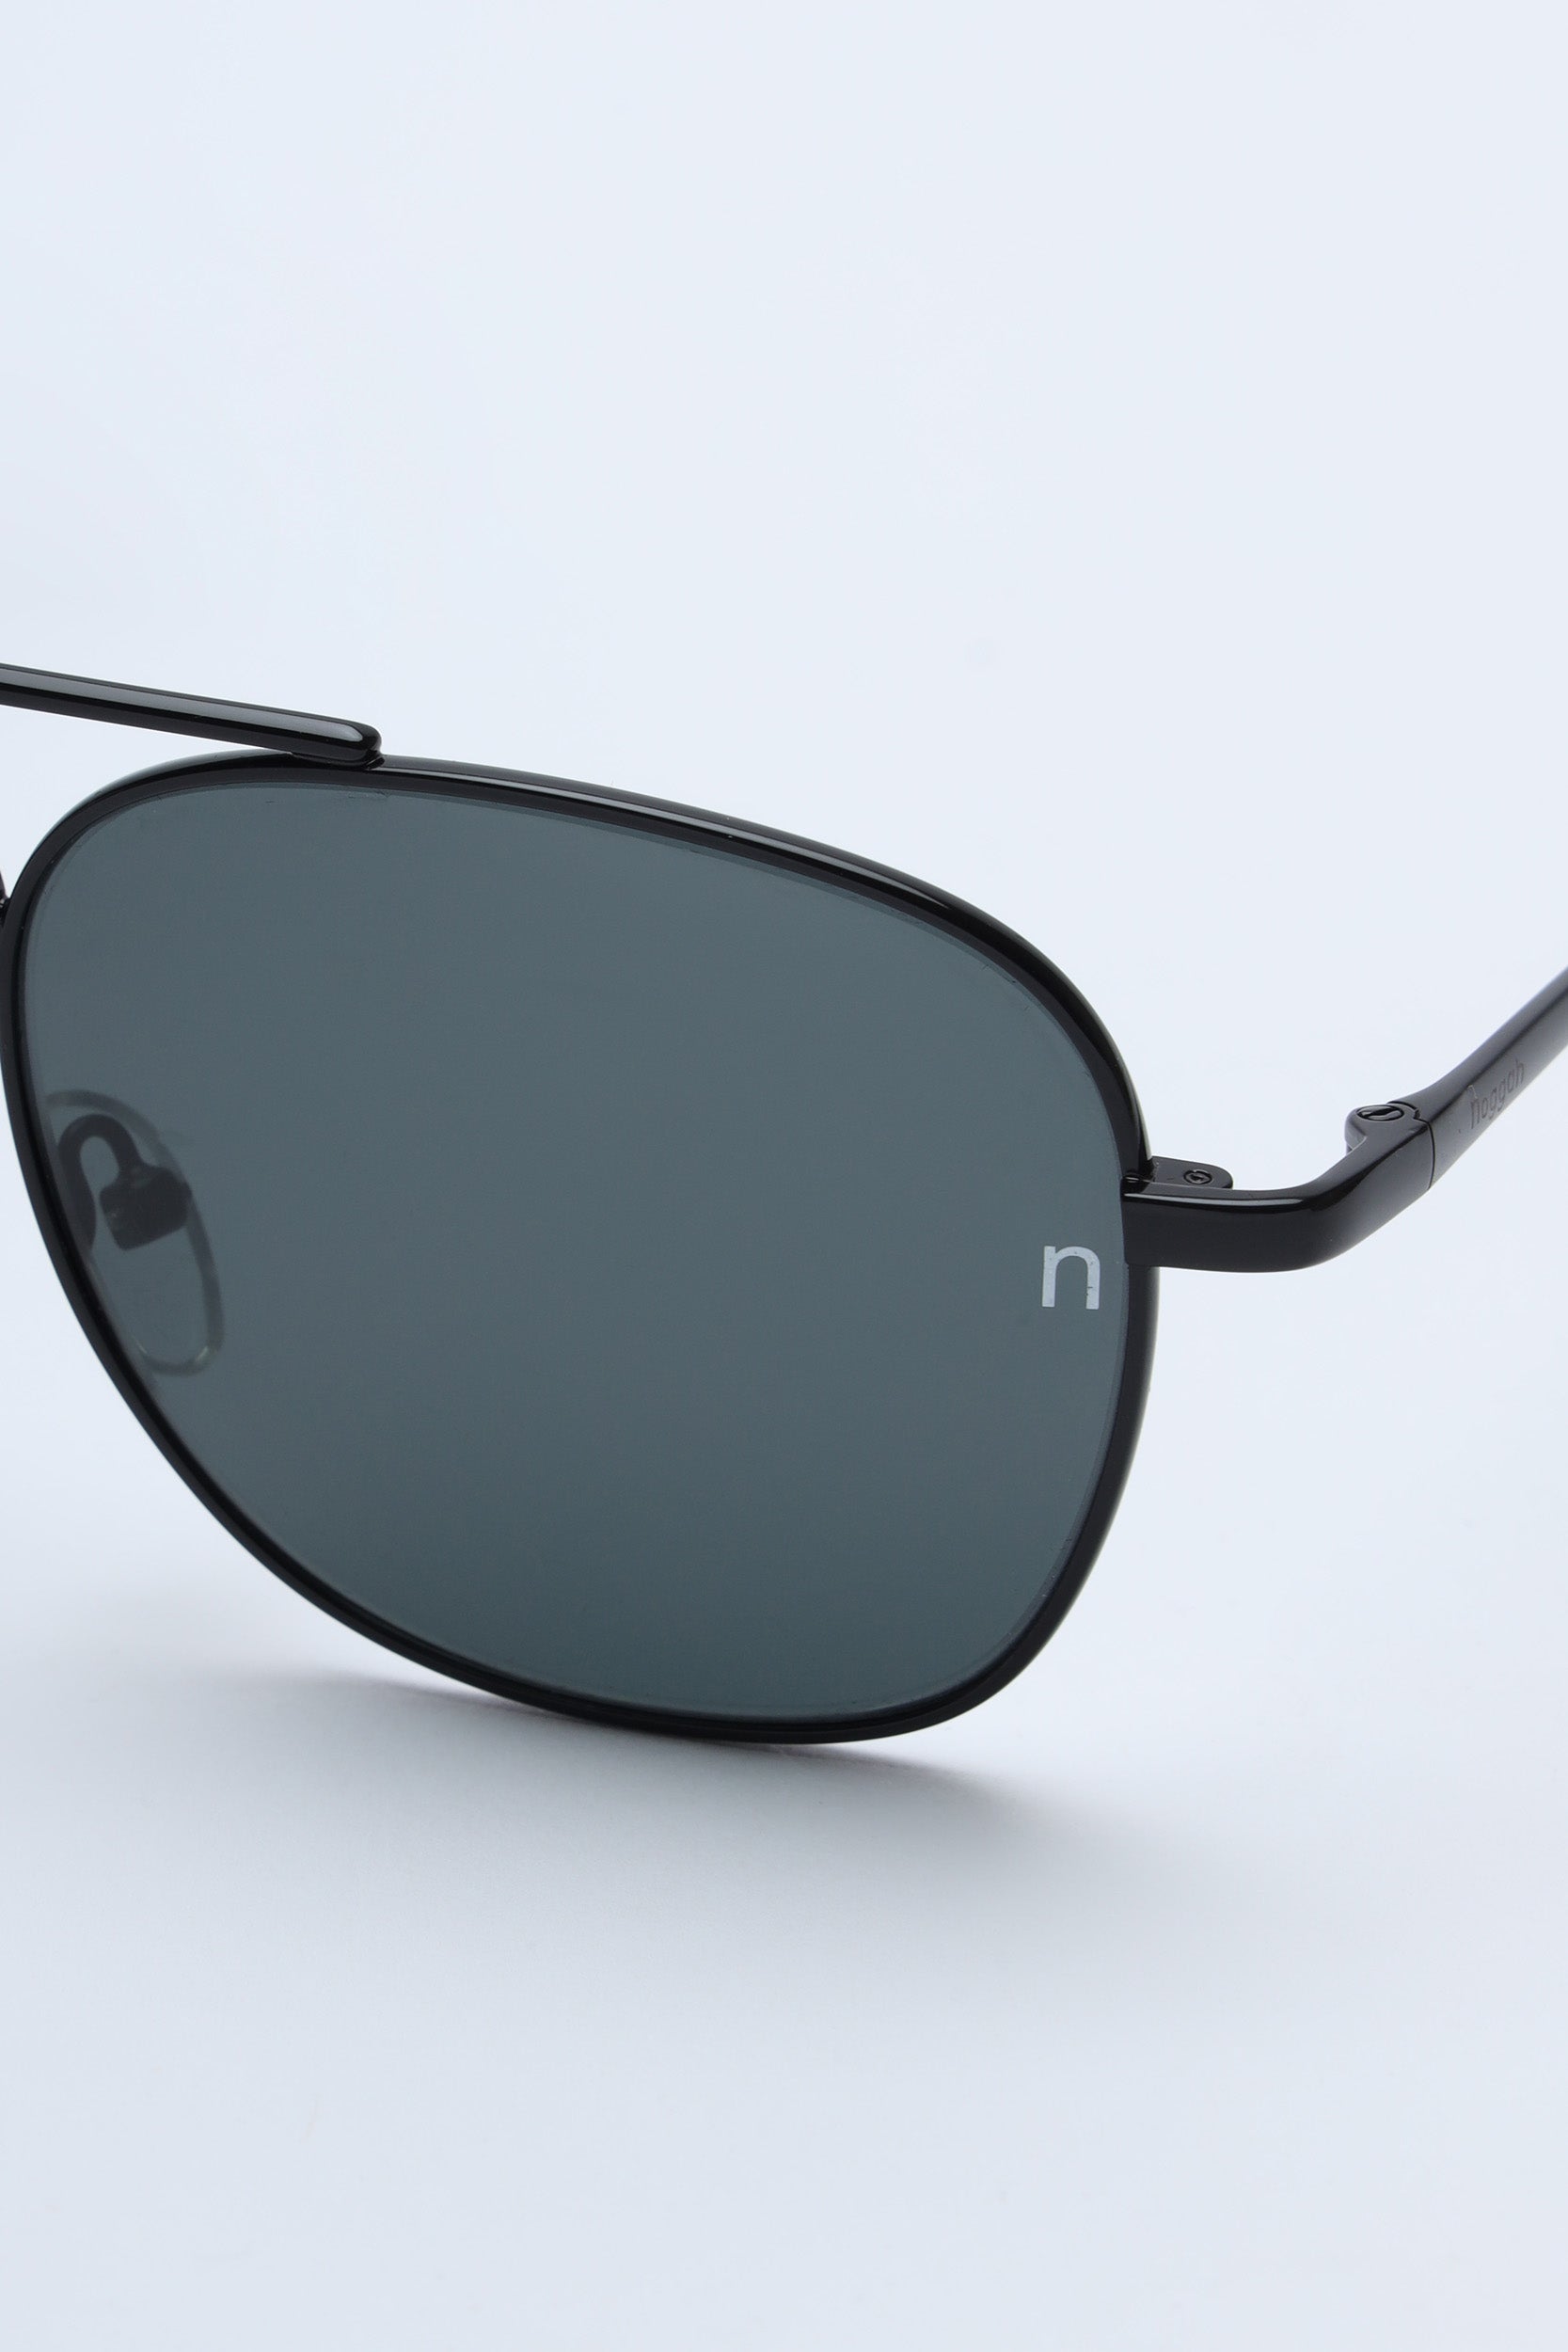 NS2006BFBL Stainless Steel Black Frame with Black Glass Lens Sunglasse